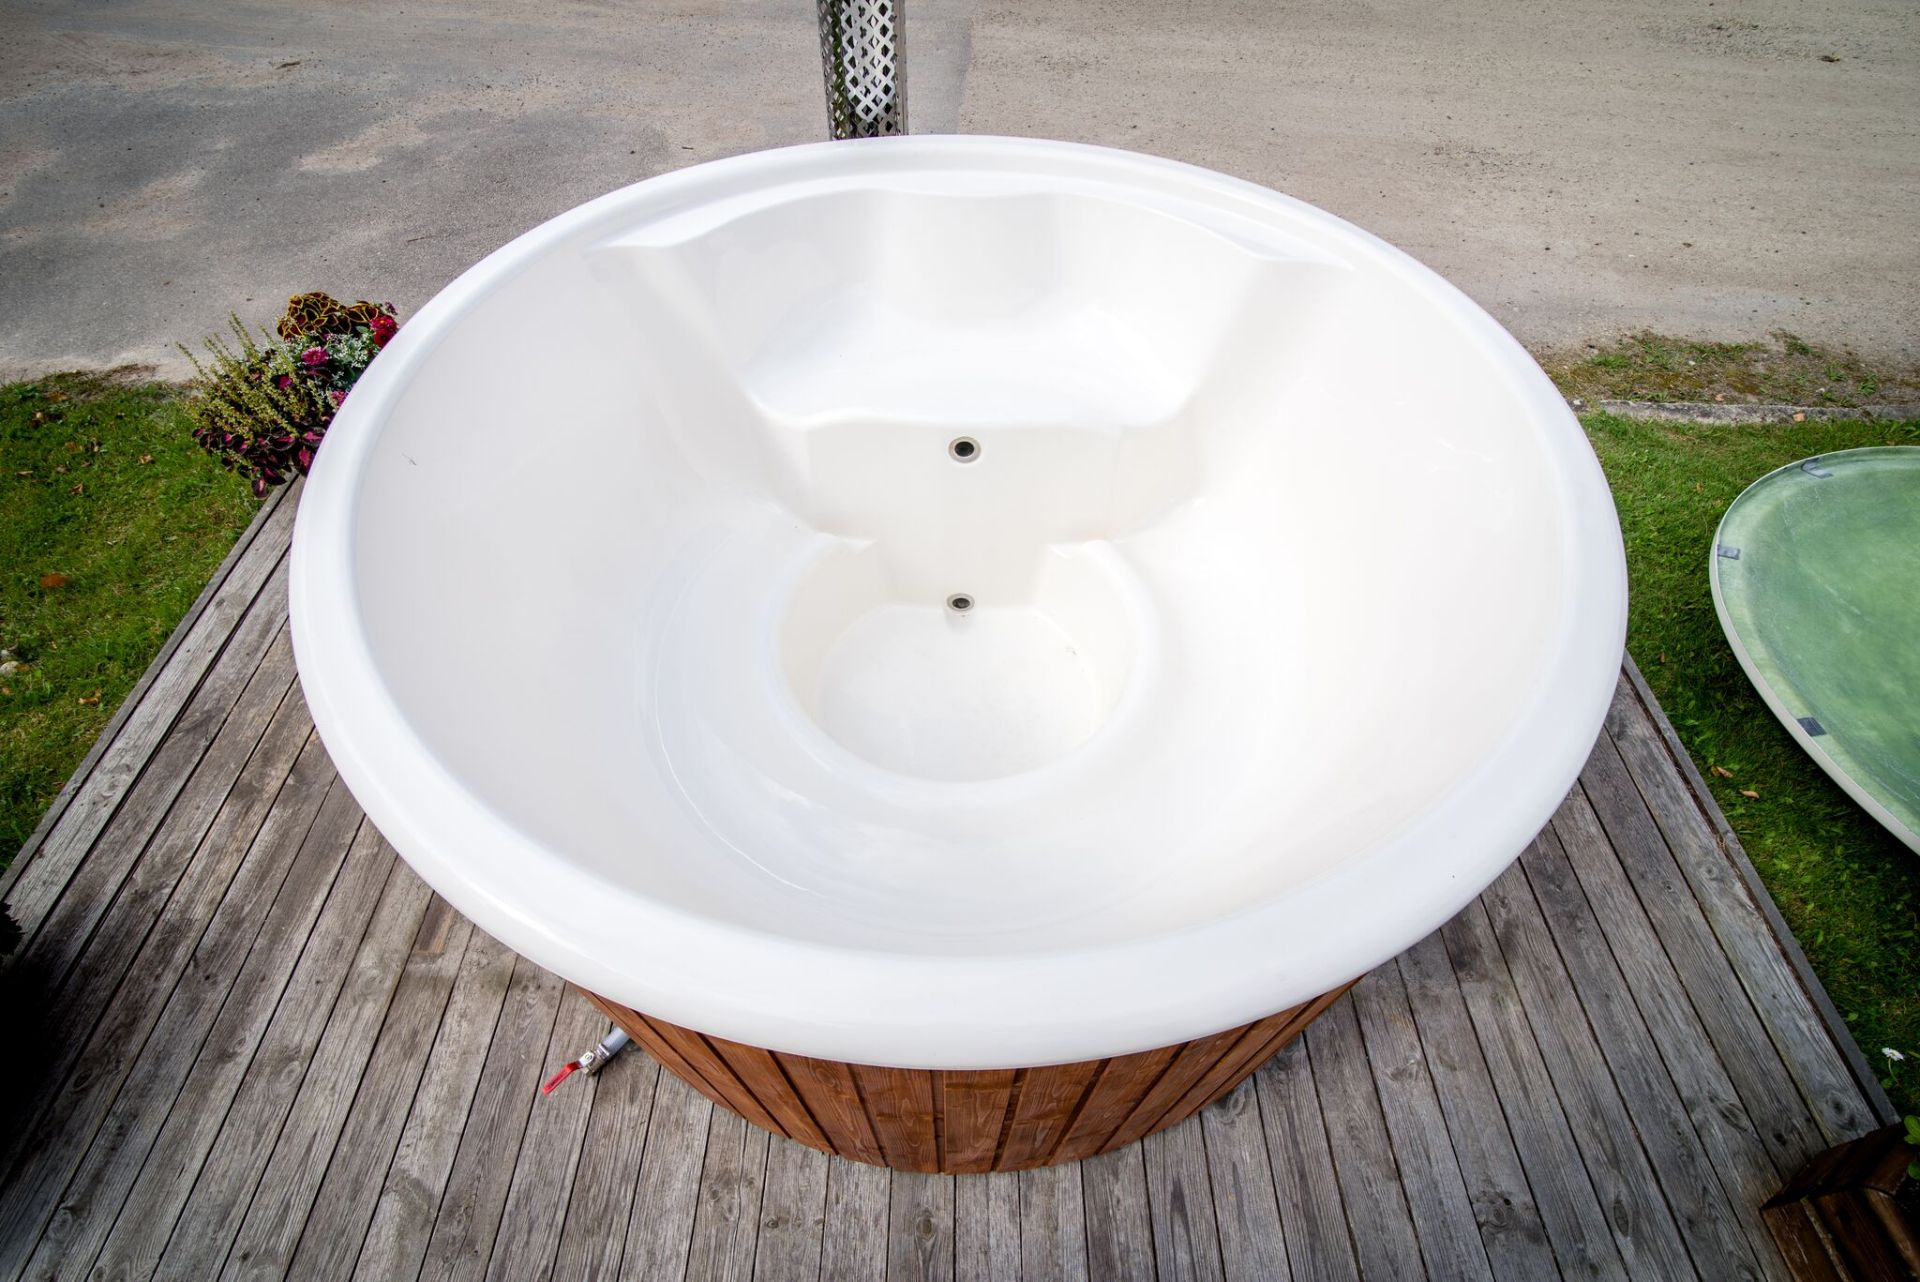 V Brand New 1.8m Fiberglass Hot Tub with Stainless Steel Heater and Chimney - Hot Tub Made from - Image 2 of 2